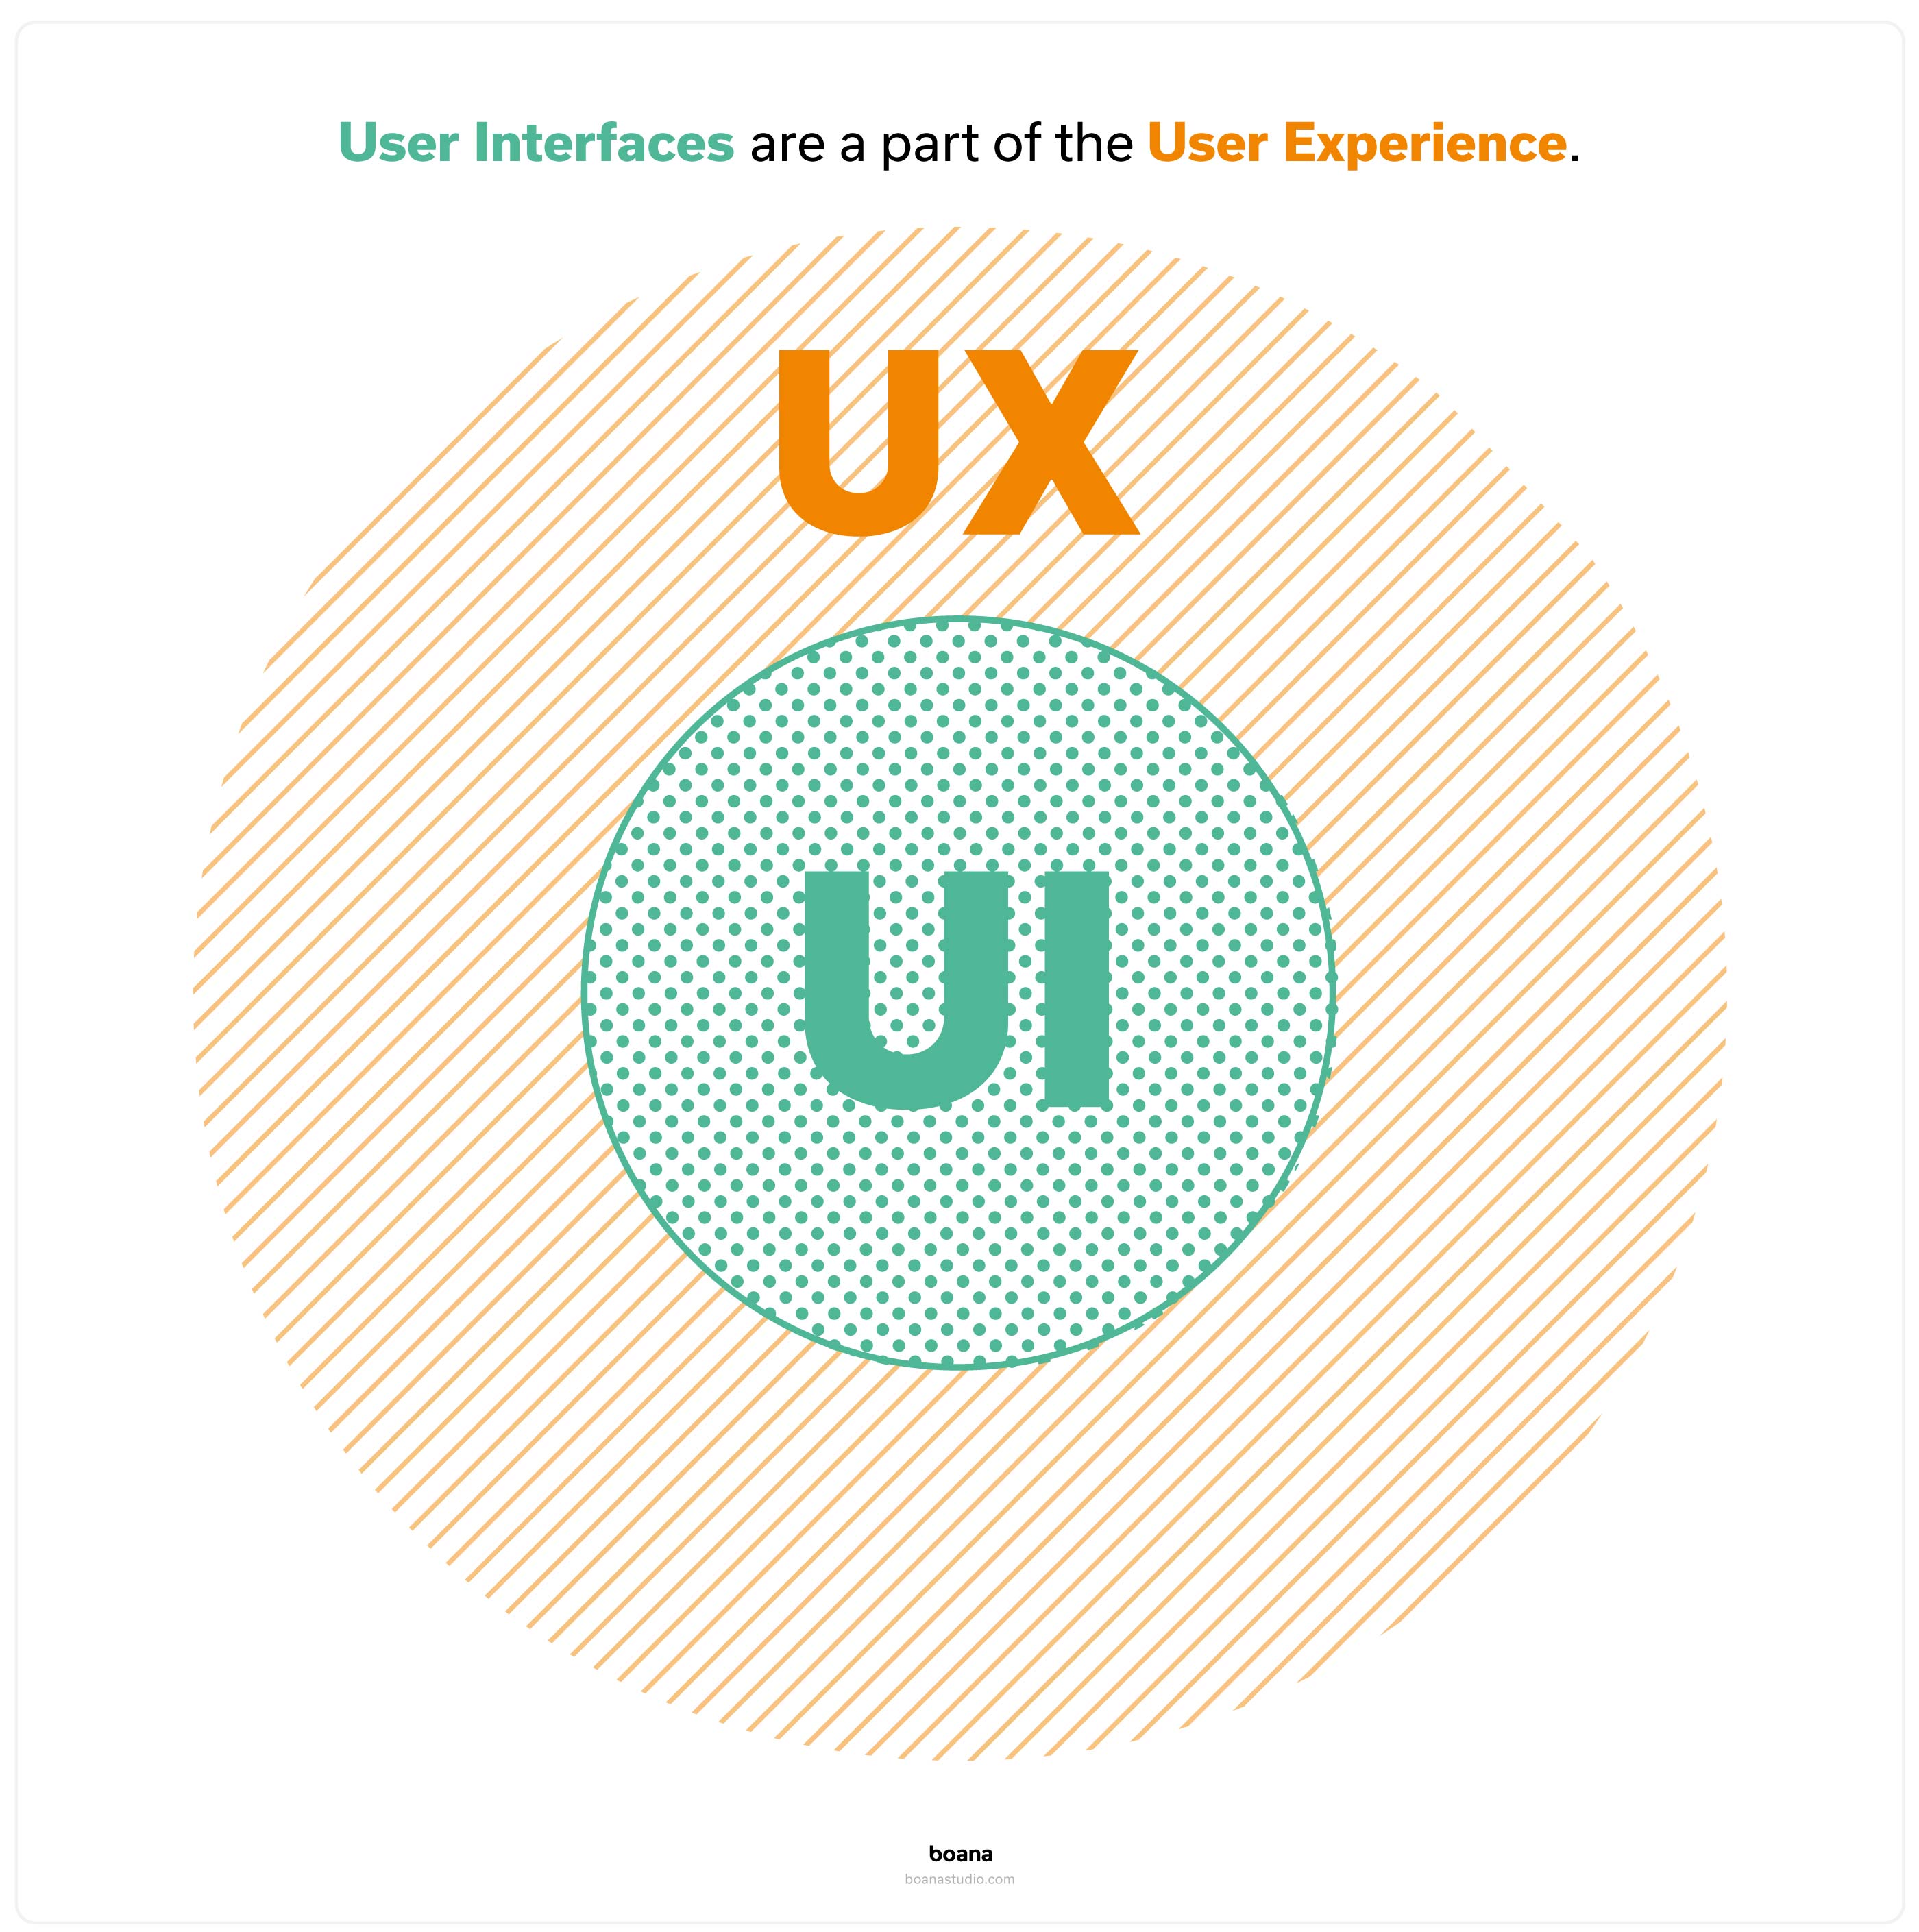 User Interface Design (UI) is part of the User Experience(UX)